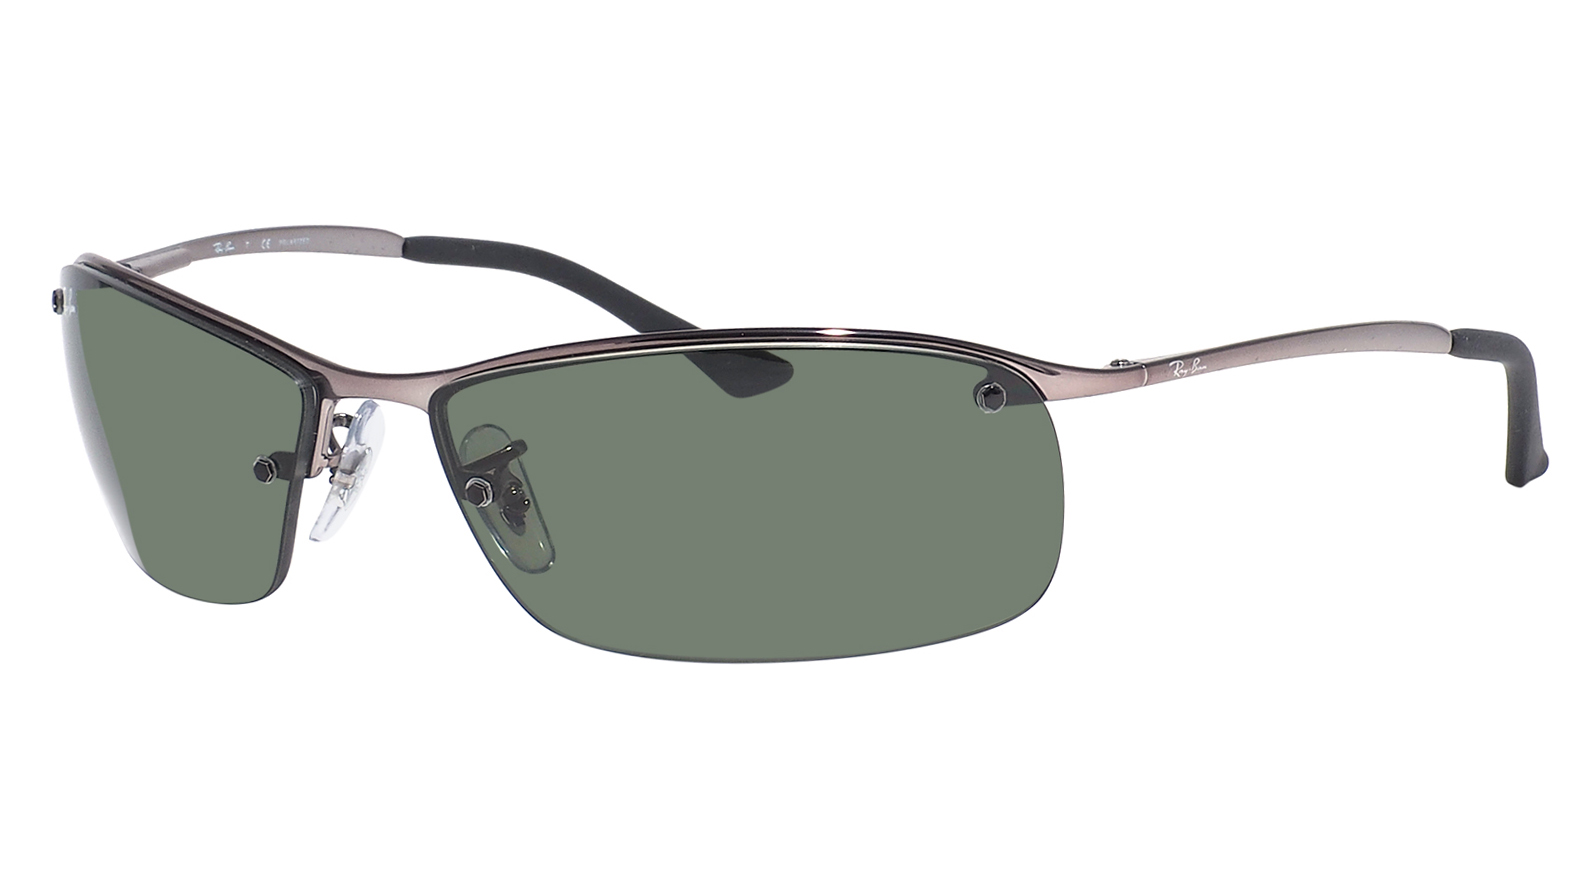 Ray-Ban Active Lifestyle RB 3183 004/9A ray ban active lifestyle rb 3183 004 9a